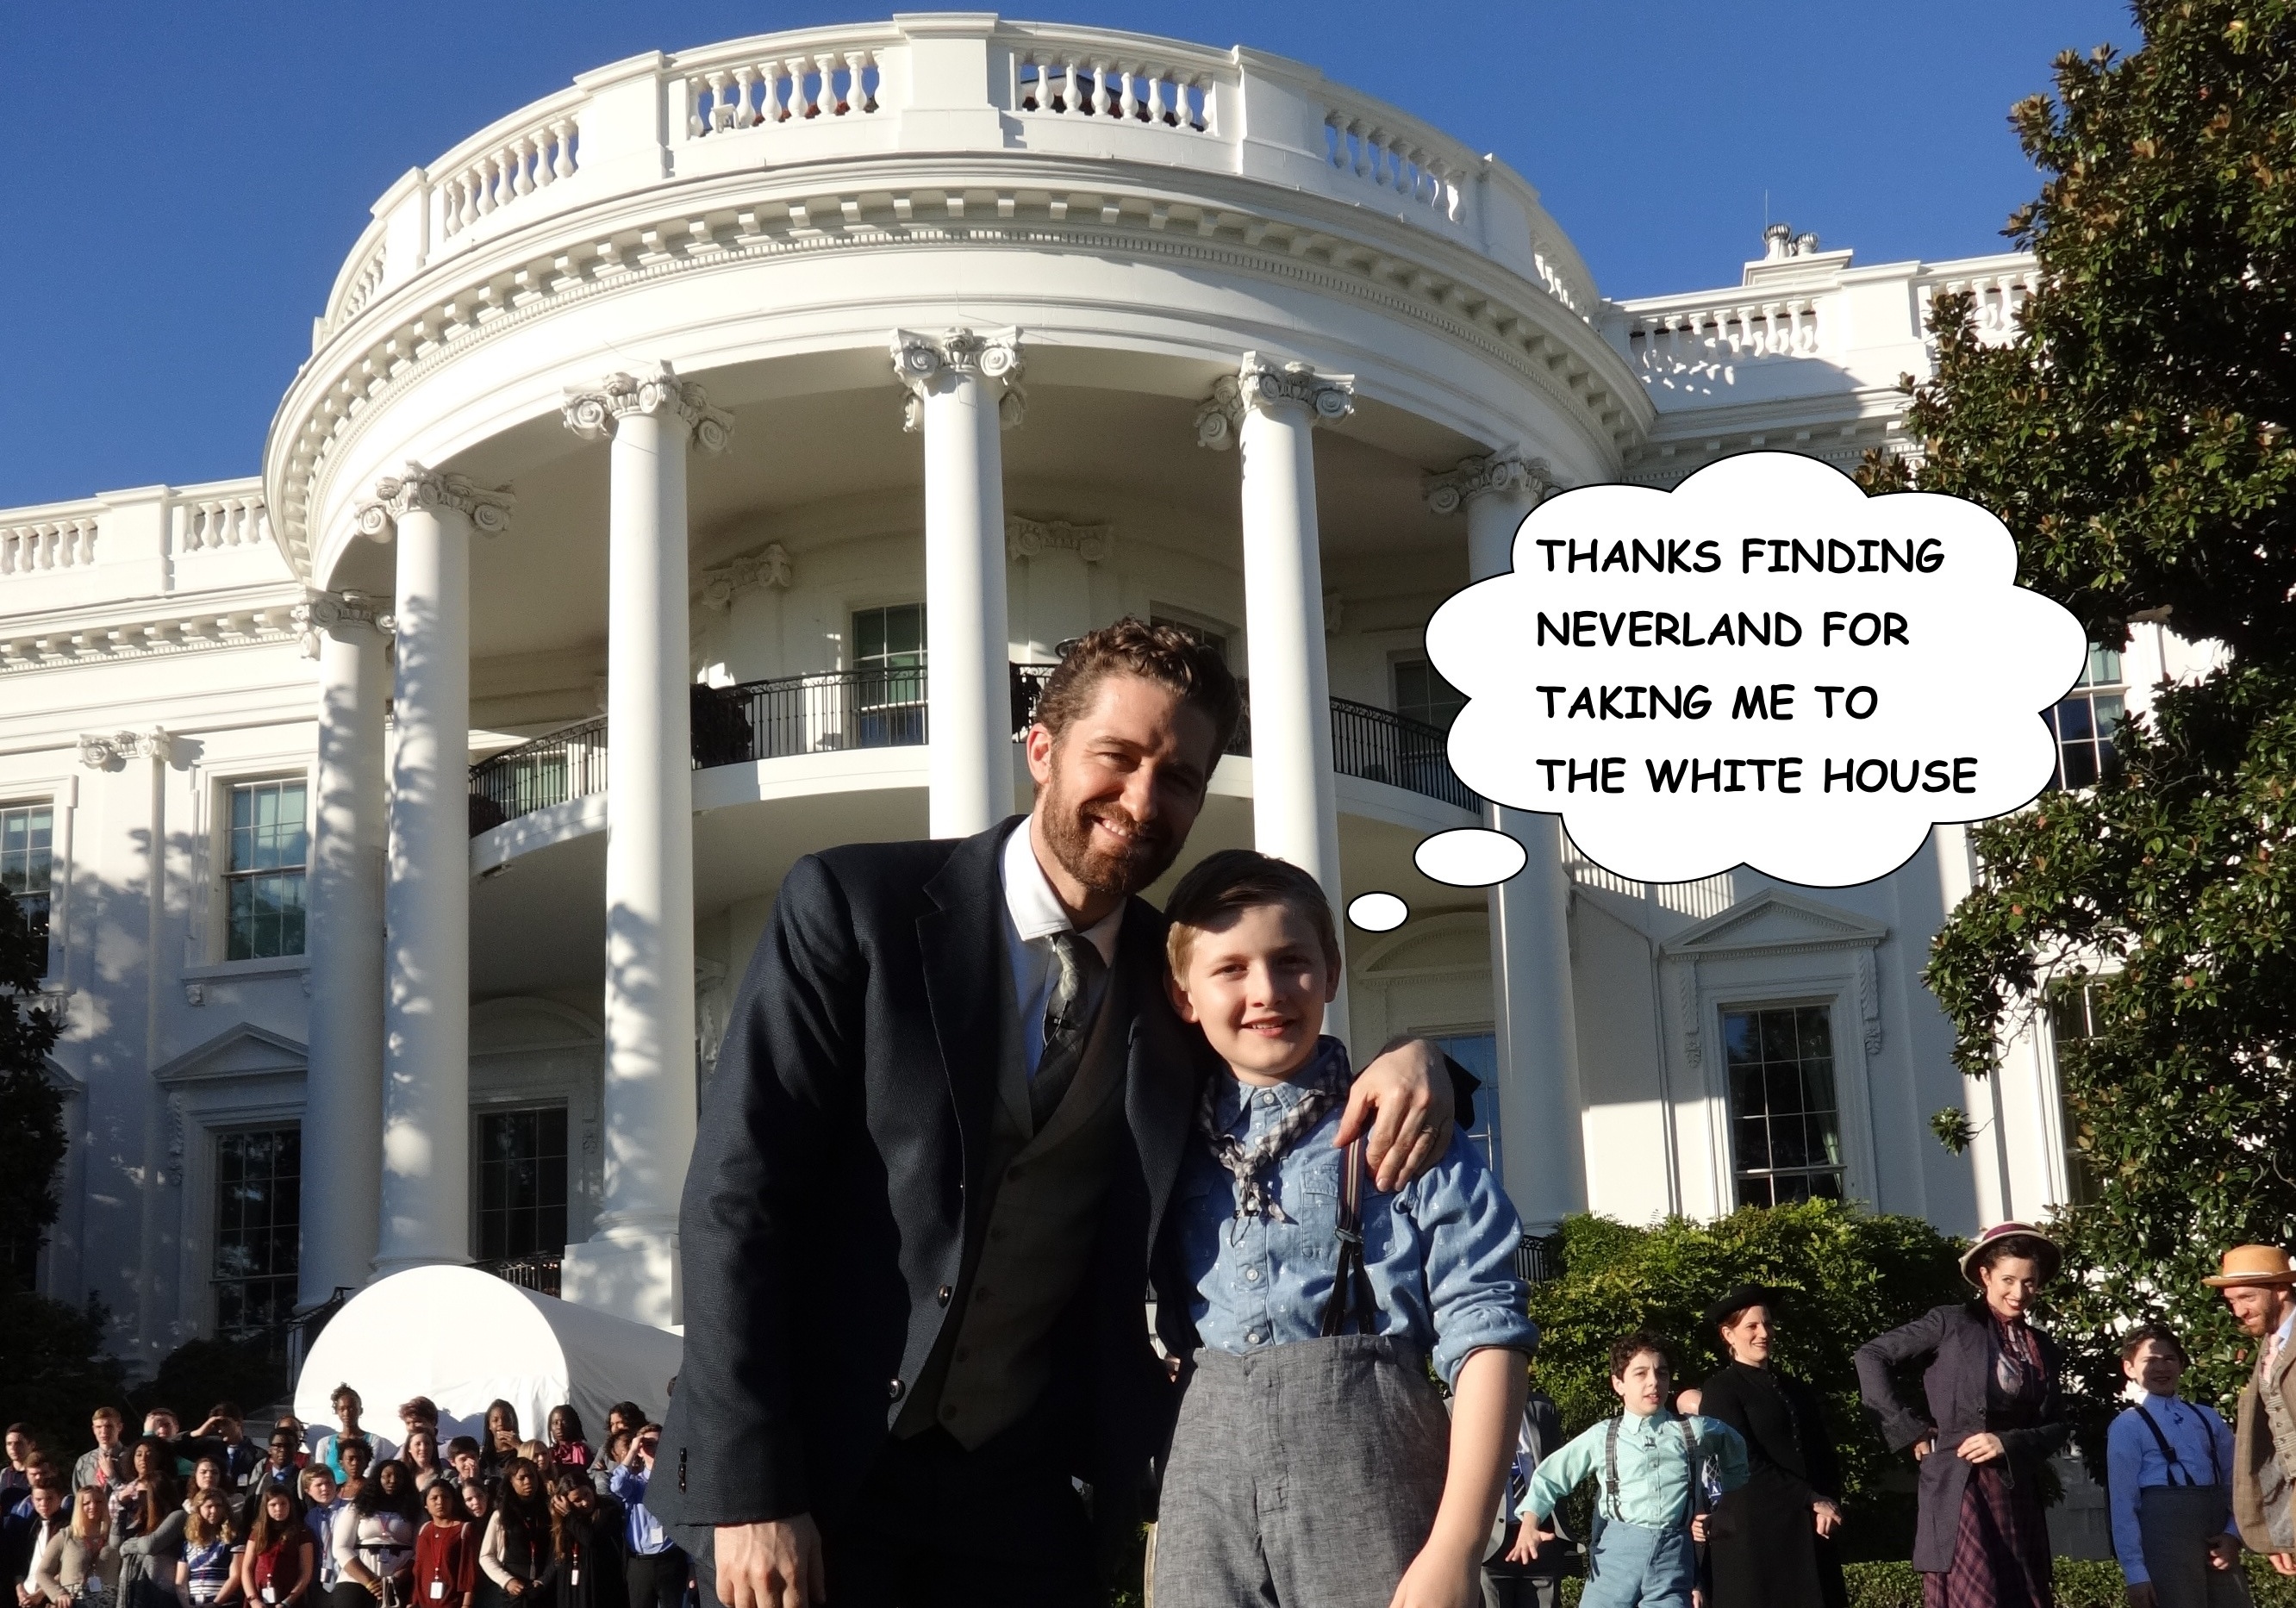 Chris Richards and Matthew Morrison at the White House for TV special